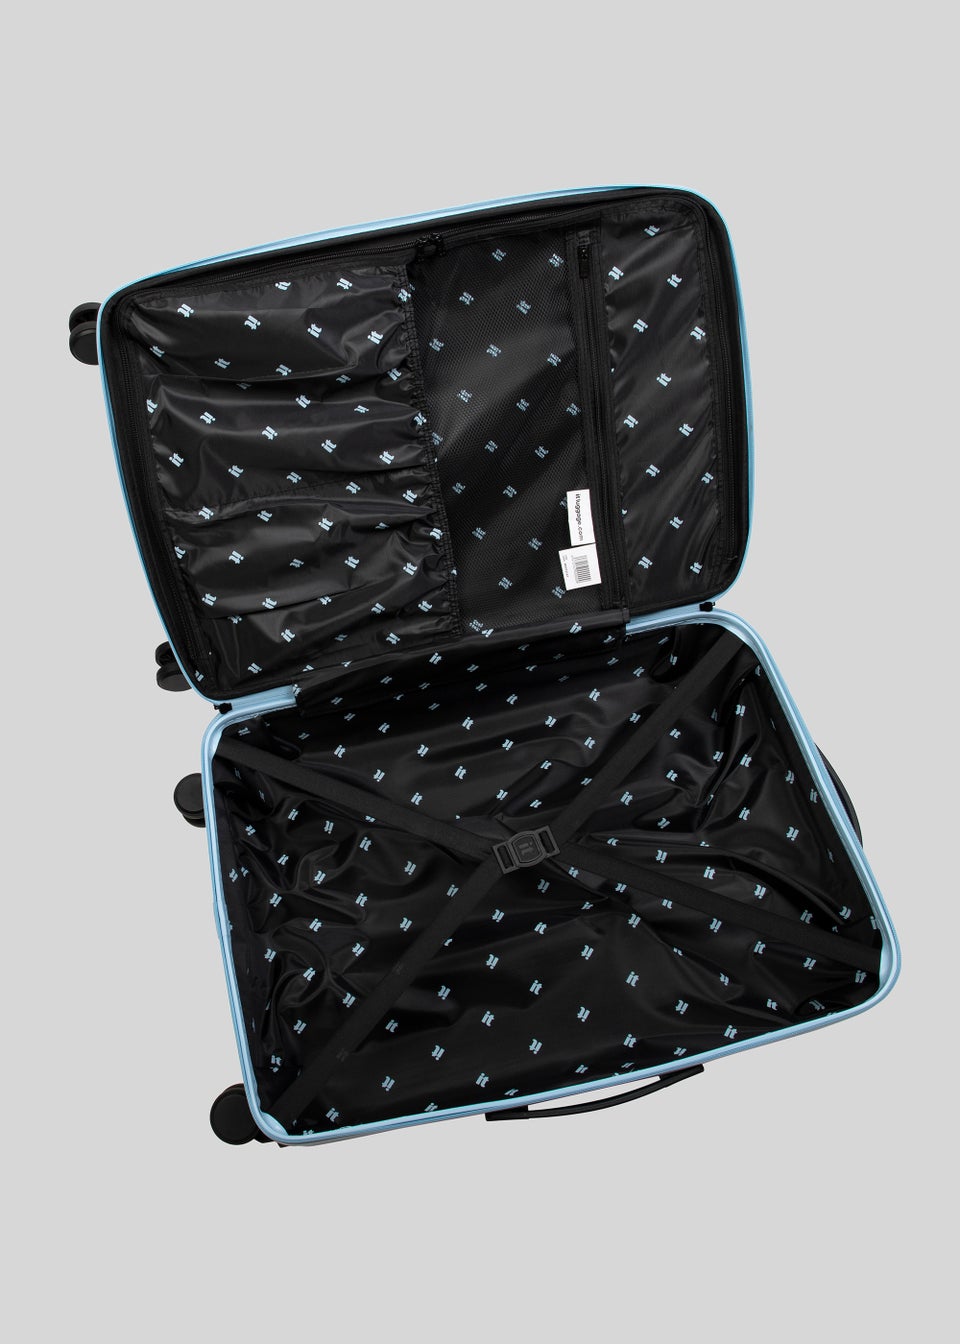 IT Luggage Blue Bee Print Suitcase